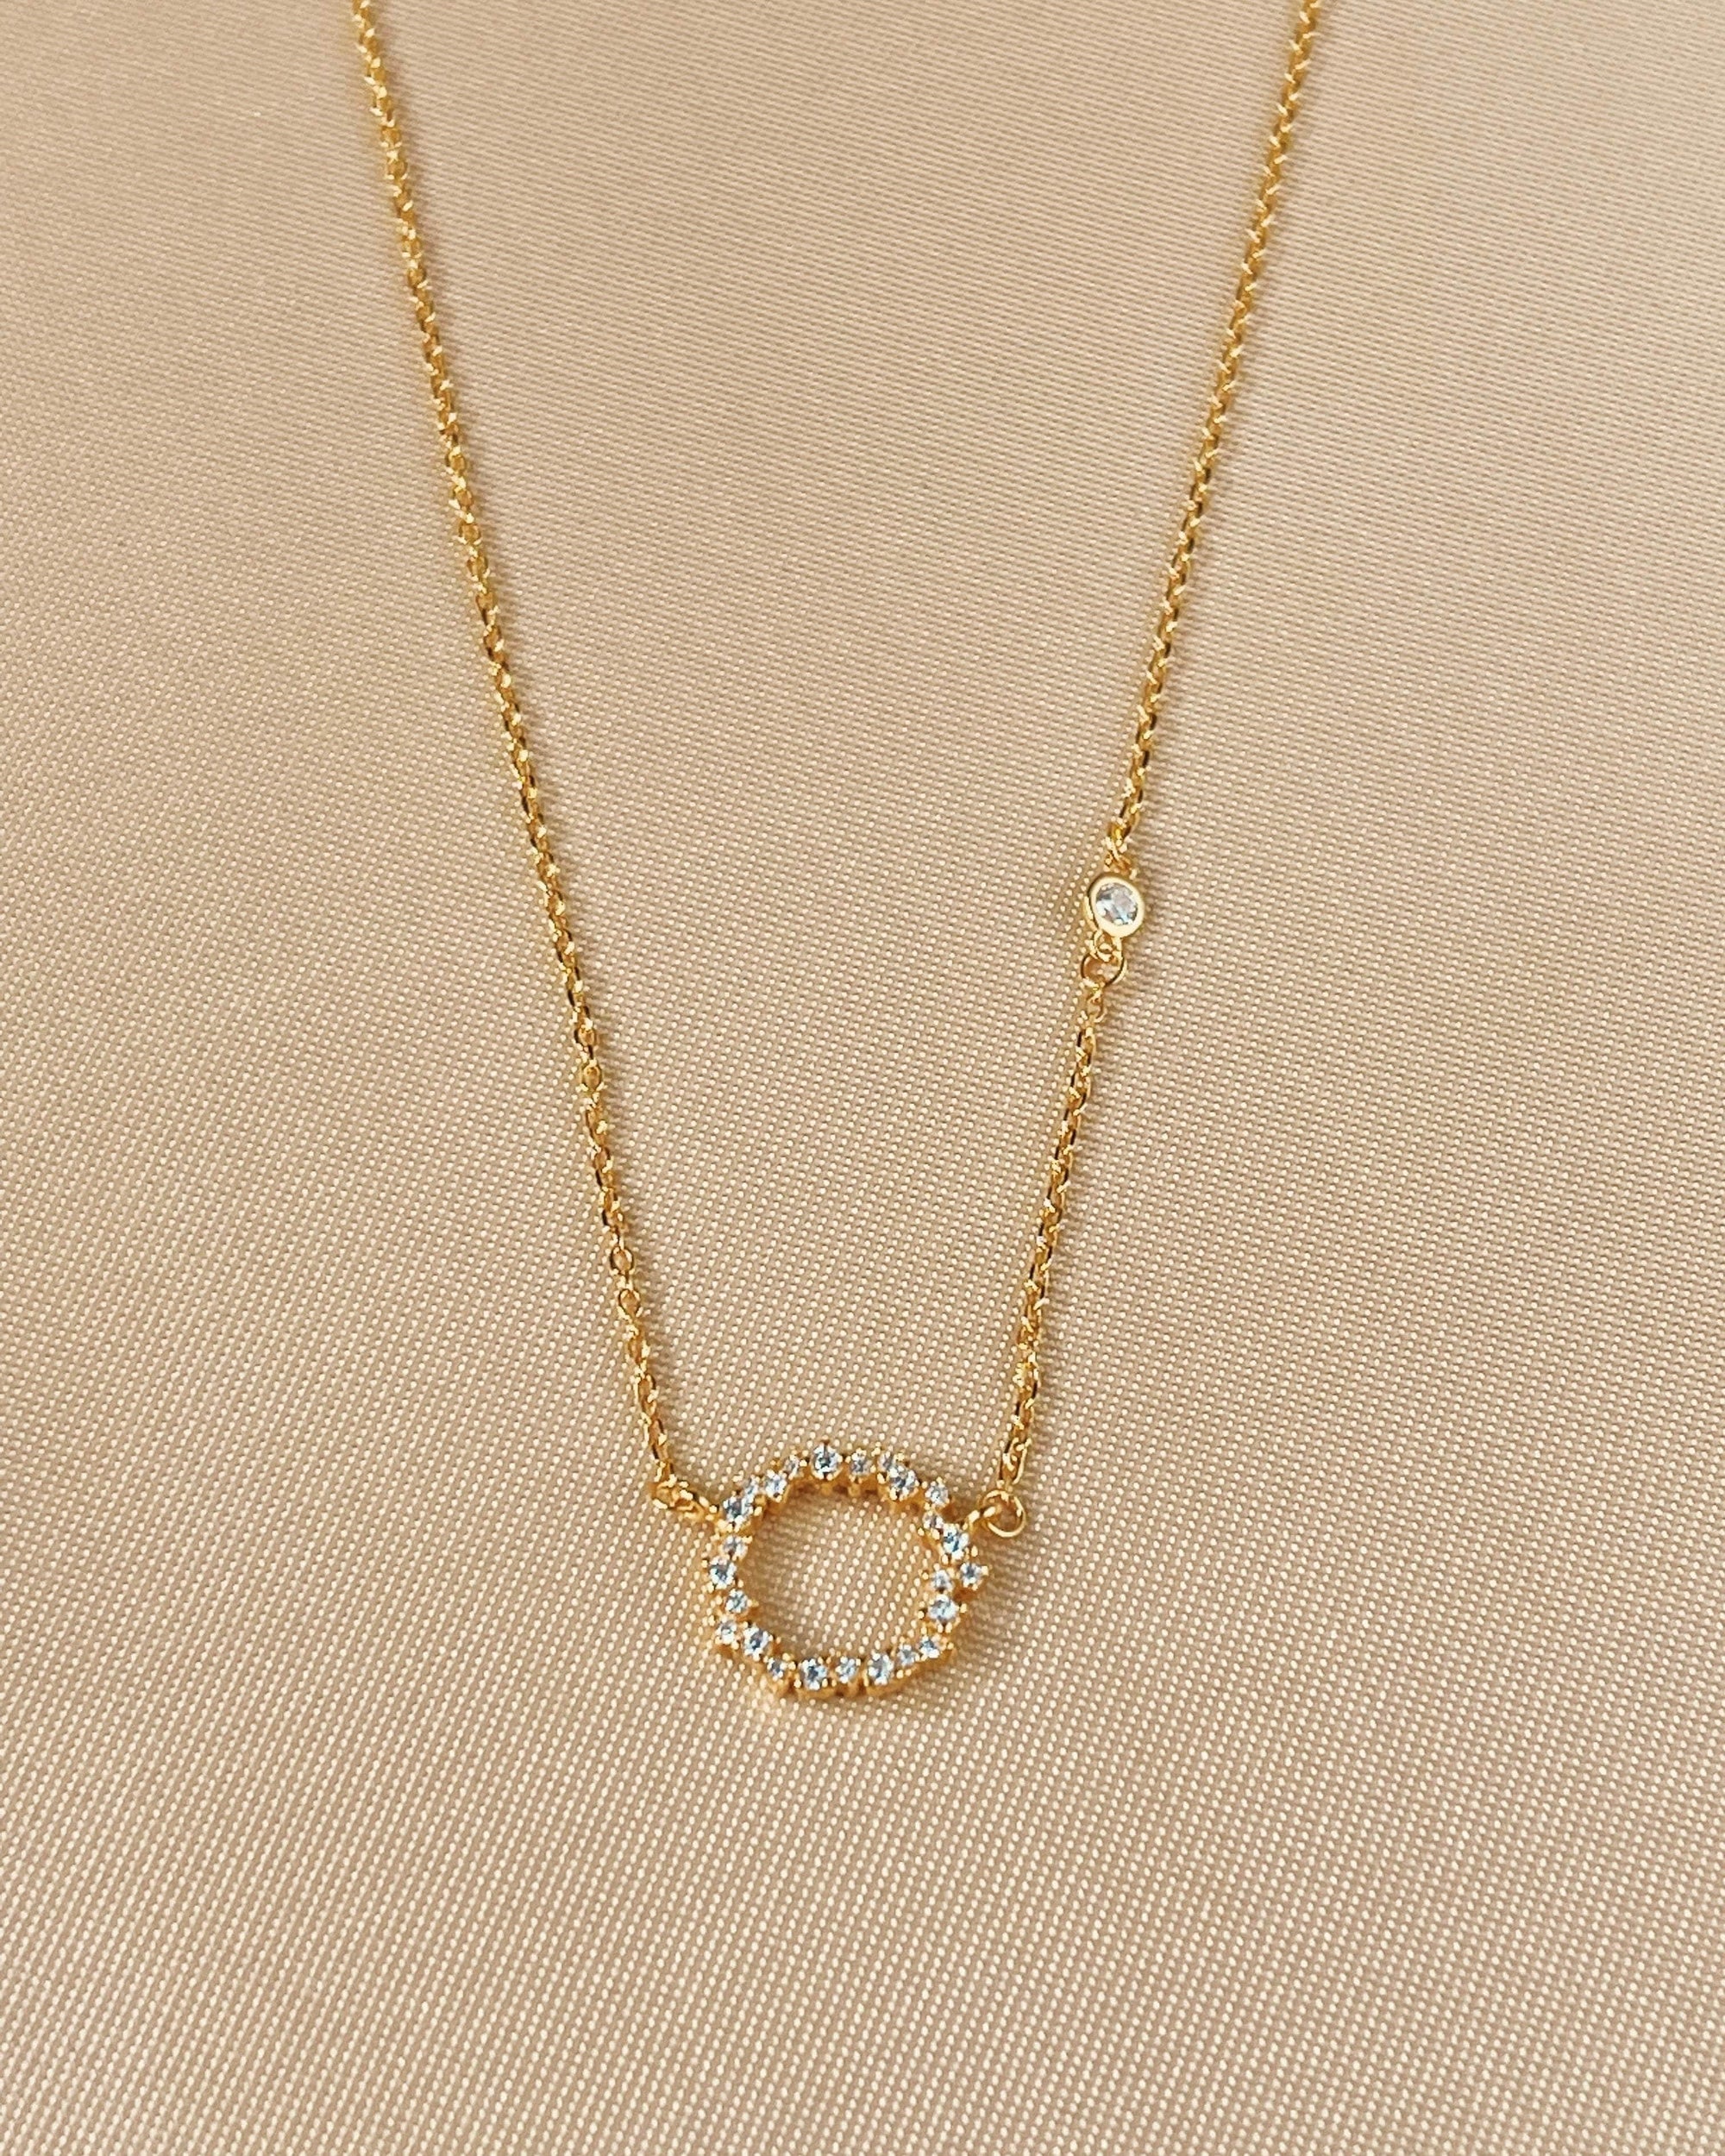 So Dainty Co. Necklaces Kayla Zircon Gold Choker Necklace Gold Plated 925 Sterling Silver Jewelry